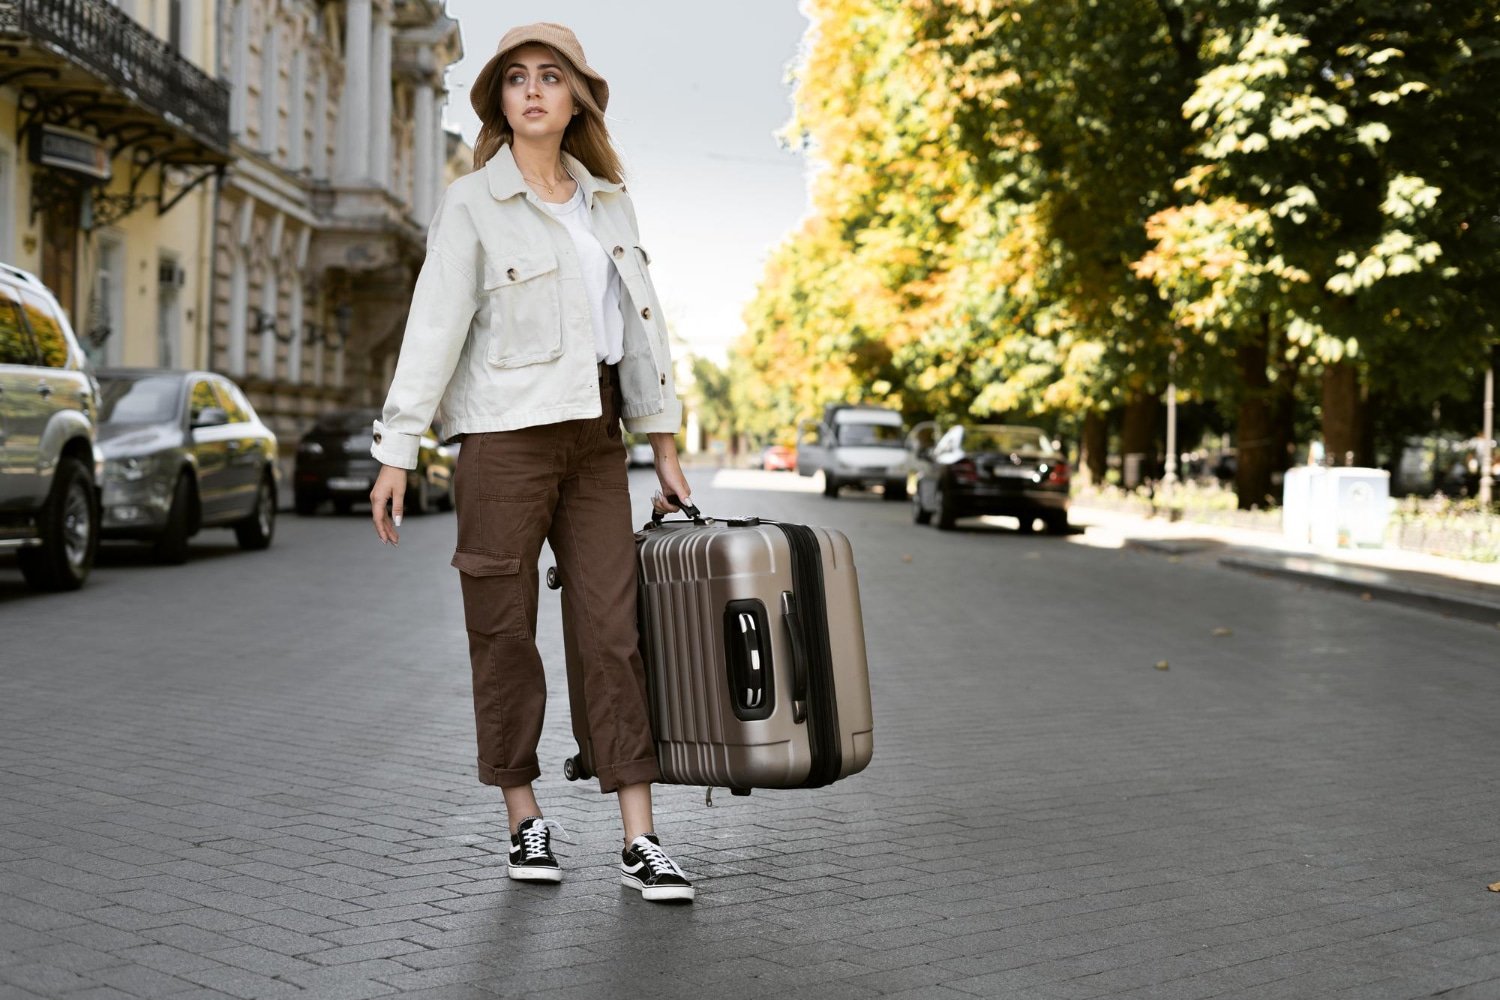 Rimowa: The Art of Travel with Luxury Luggage